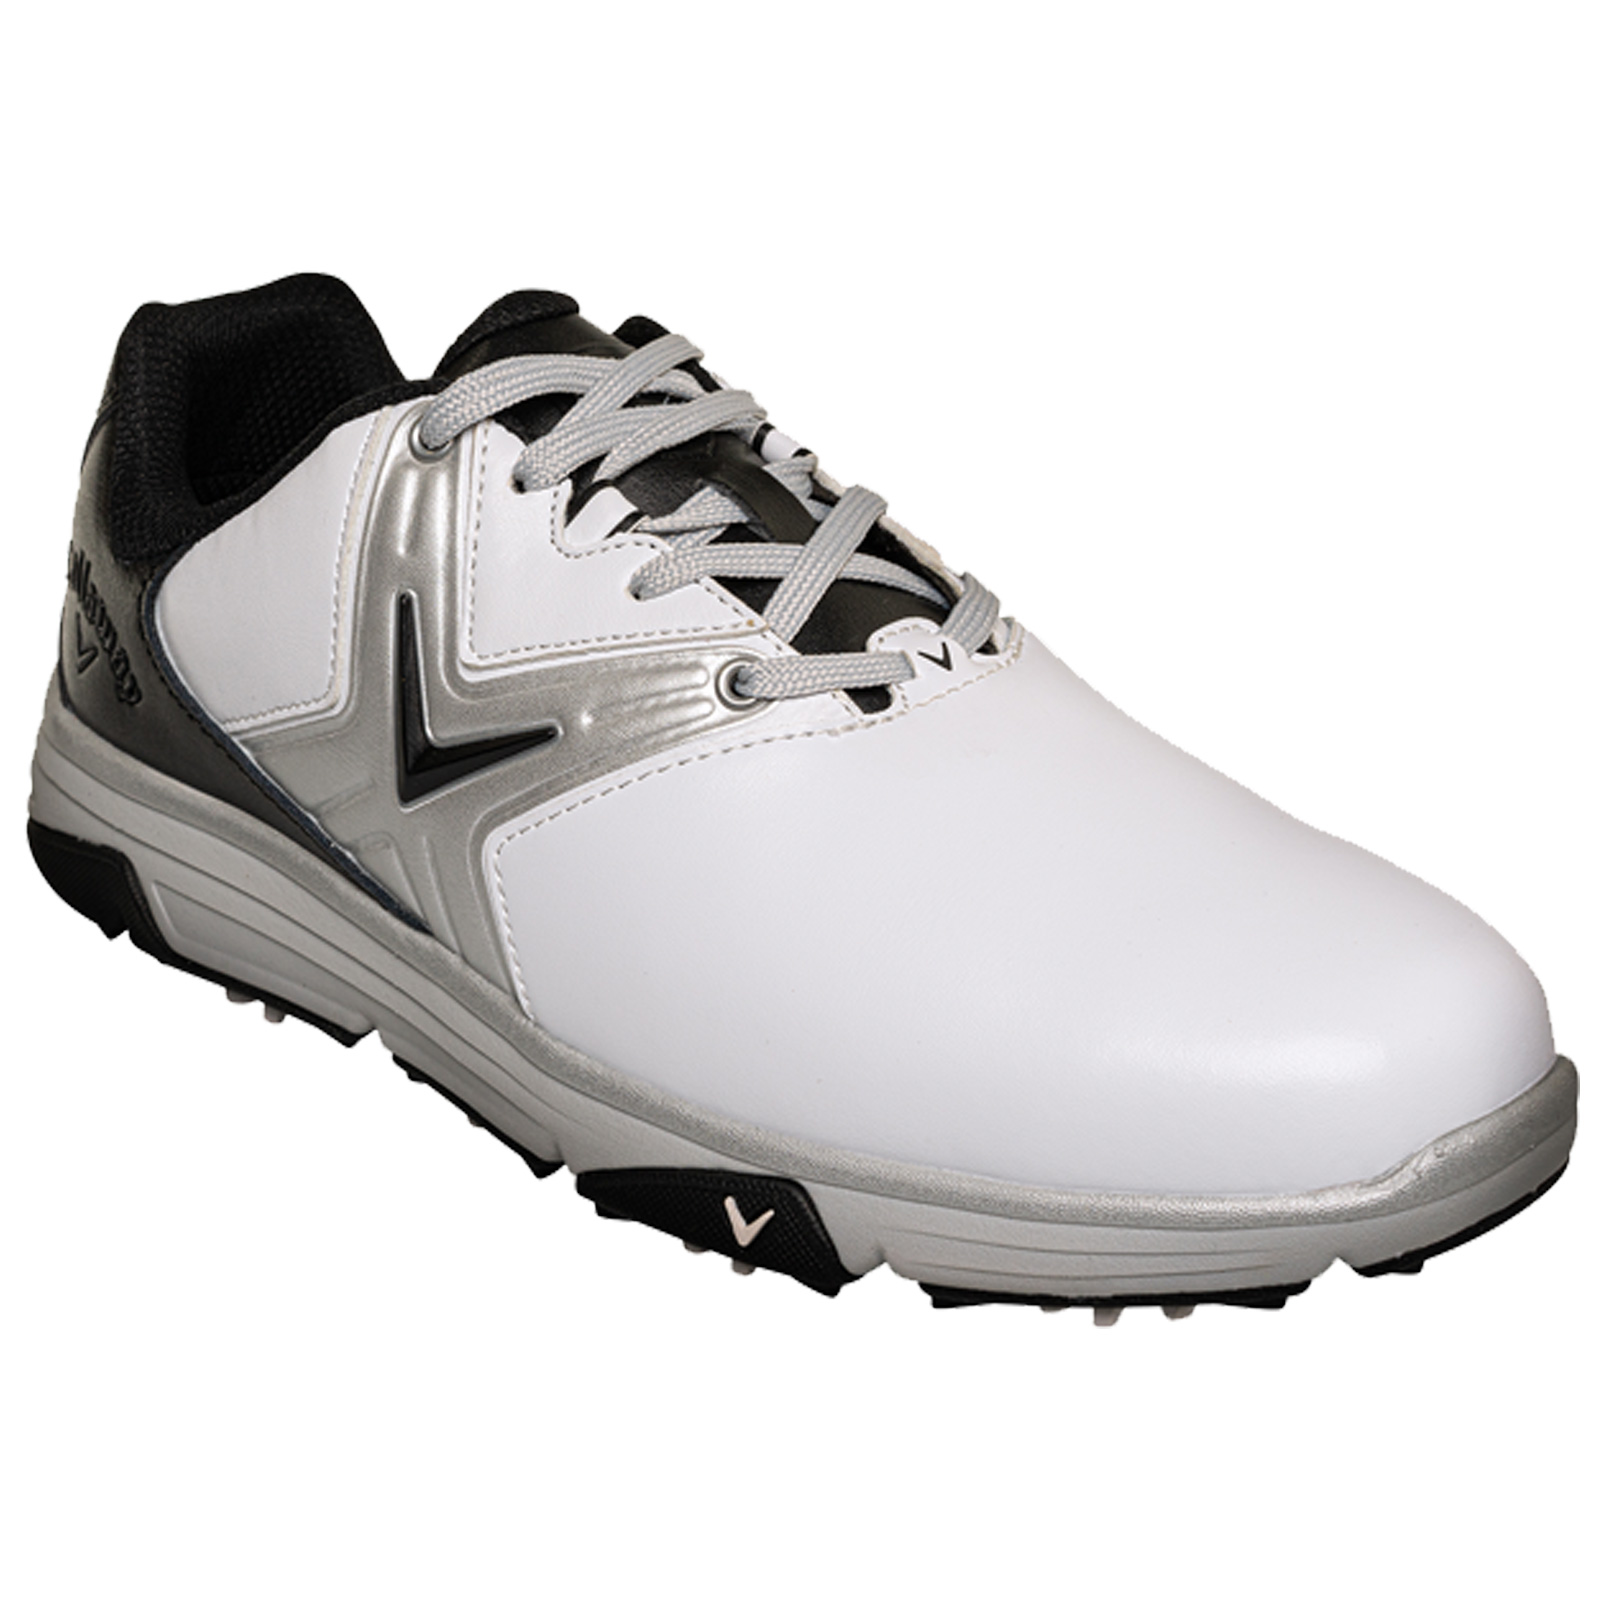 2021 Callaway Mens Chev Comfort Golf Shoes Spiked Leather Waterproof ...